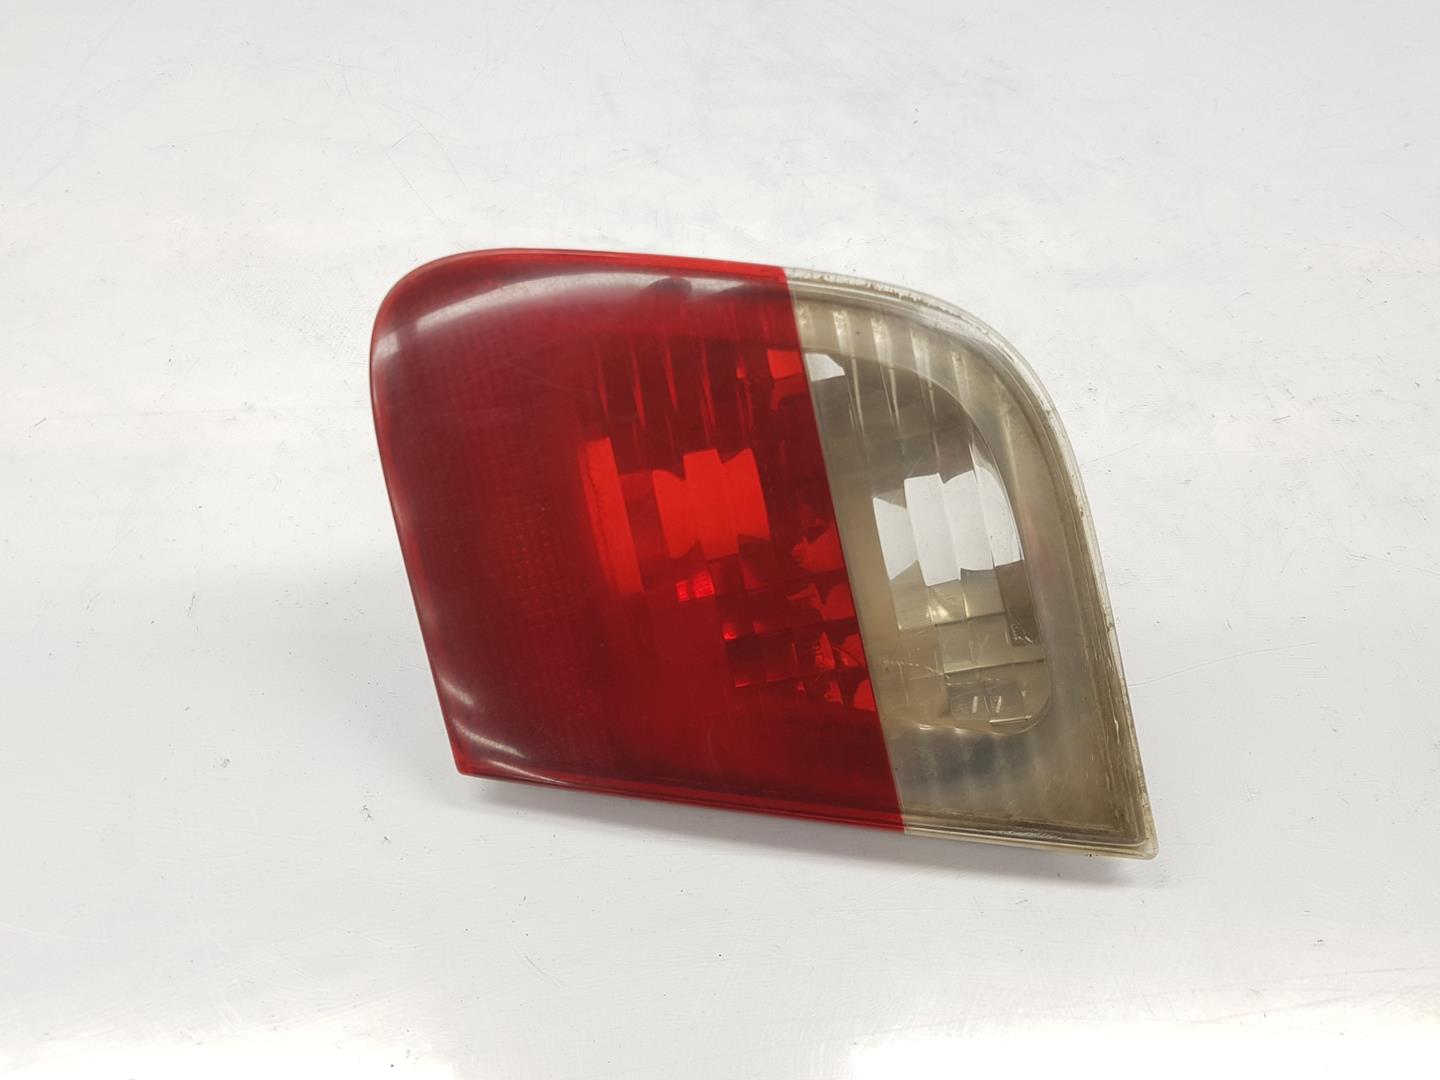 BMW 3 Series E46 (1997-2006) Rear Right Taillight Lamp 63216910538, 6910538 24155999